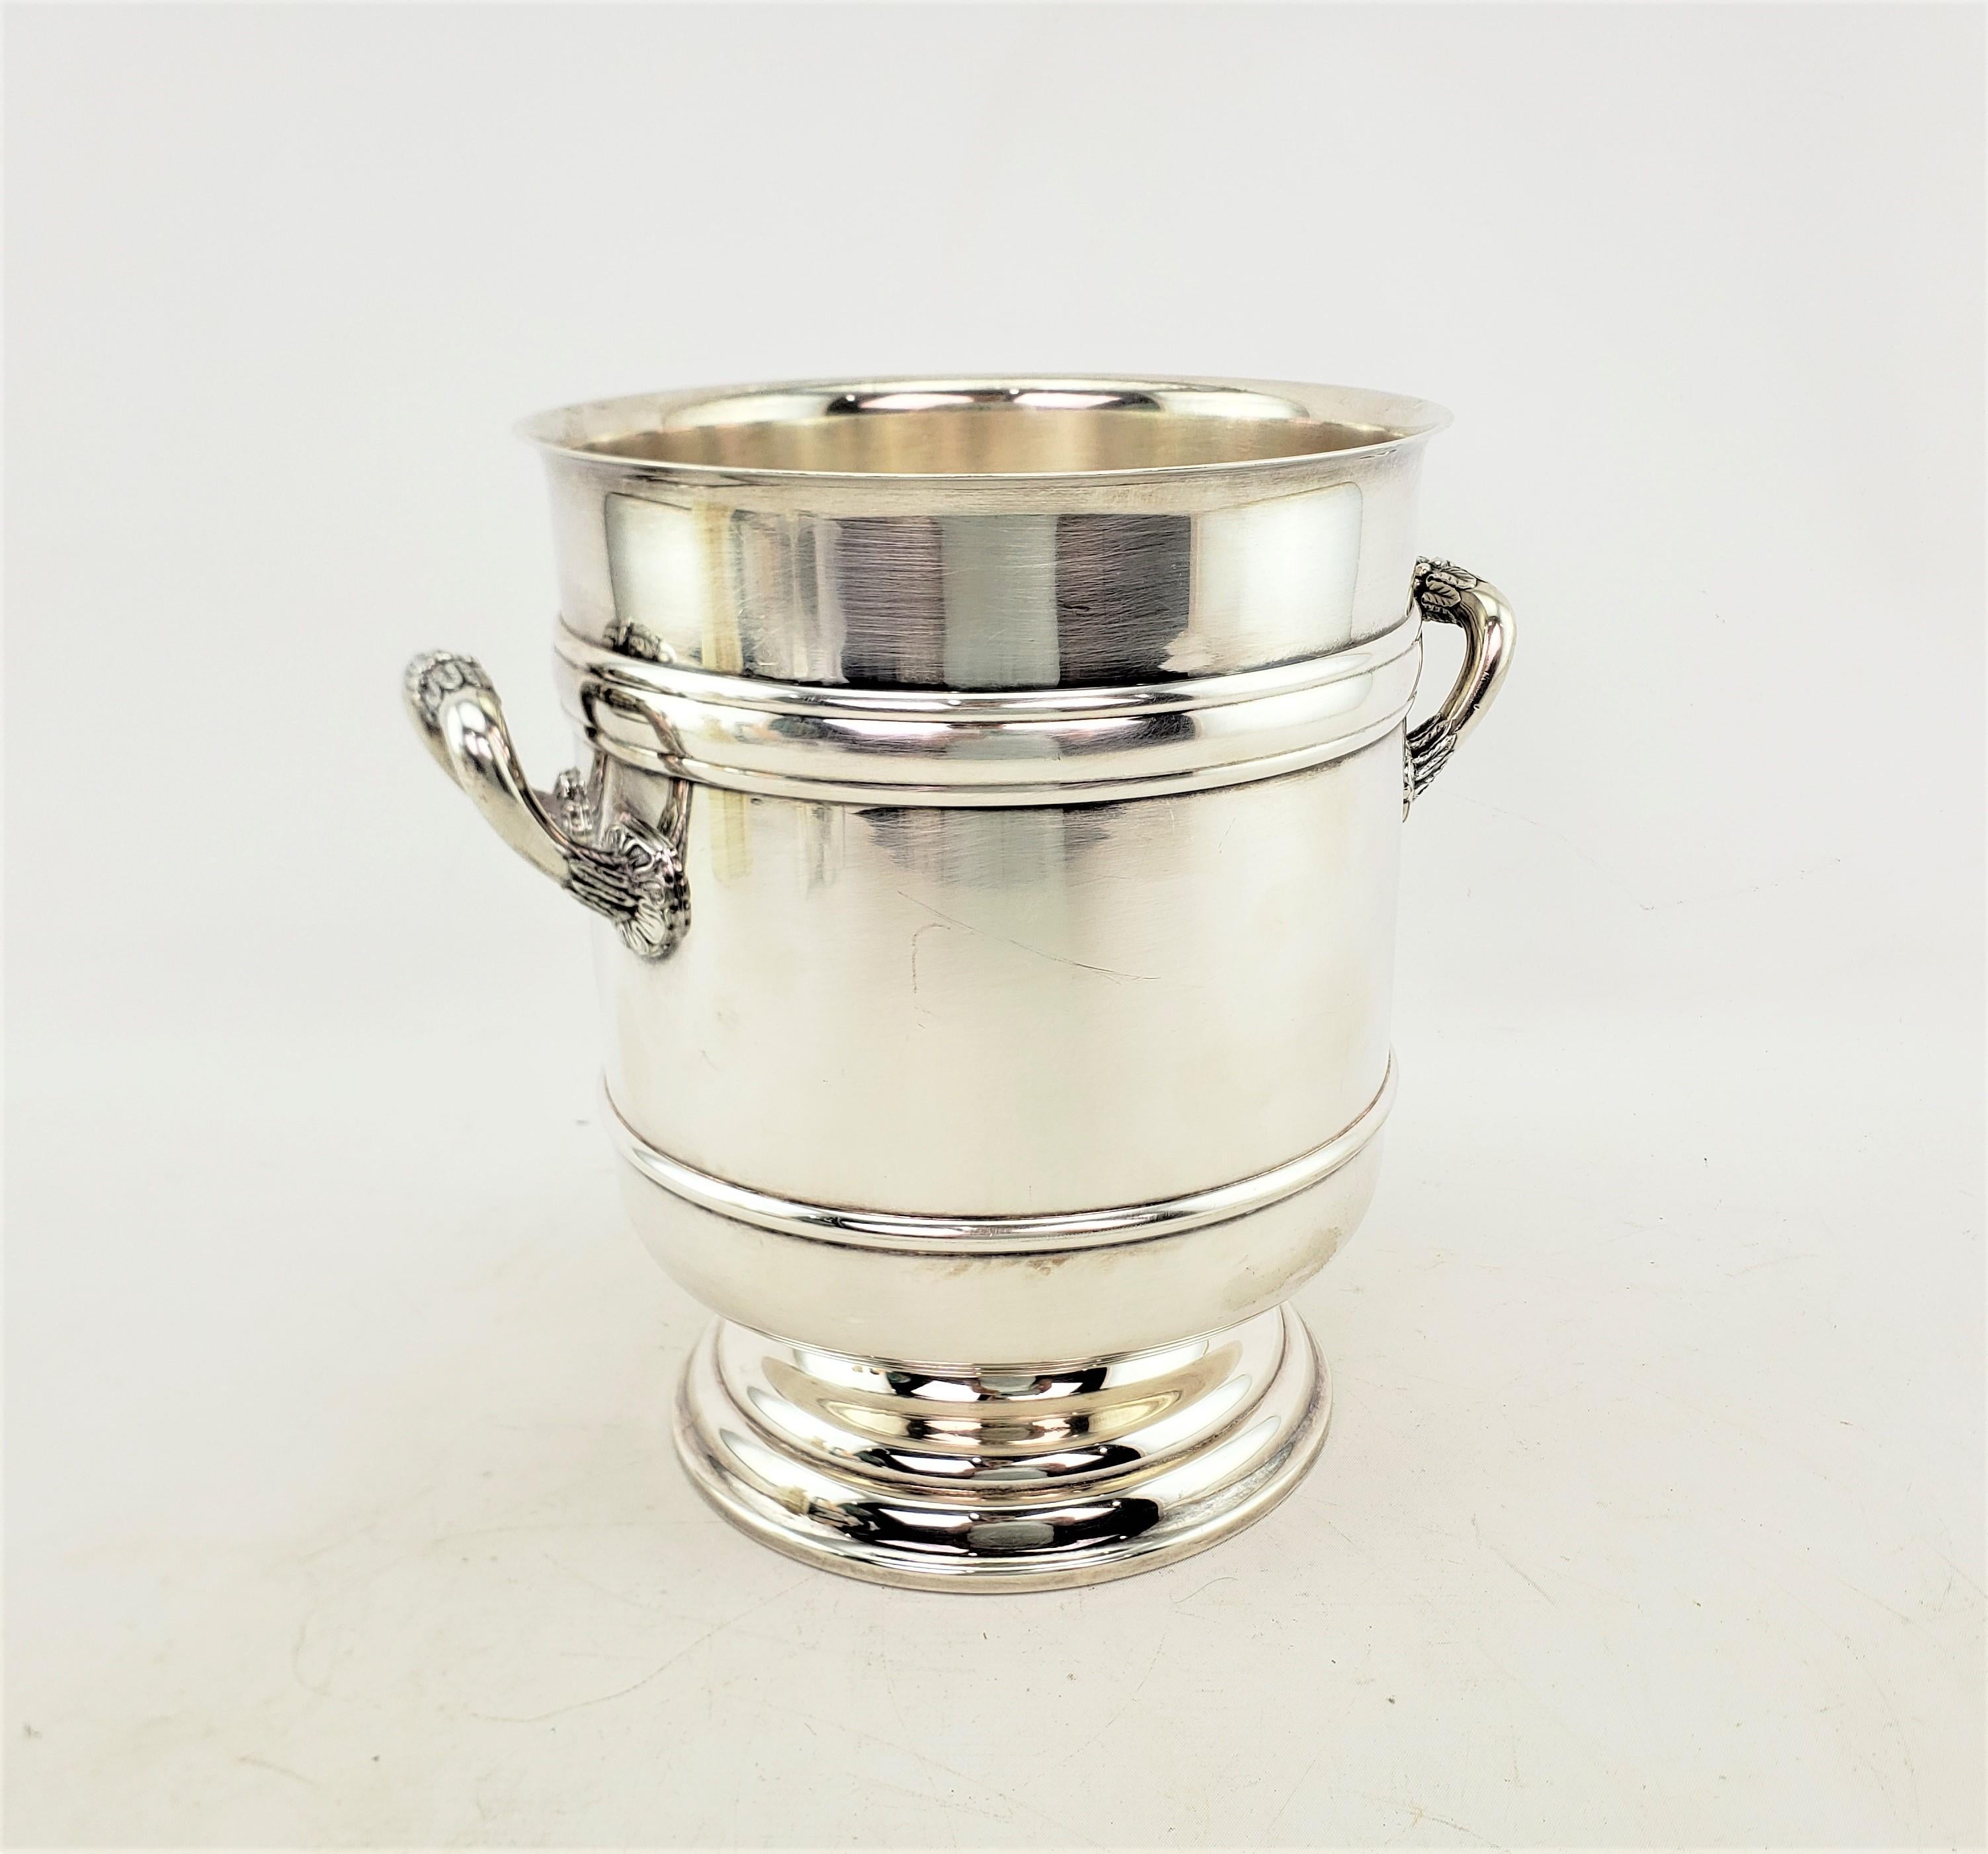 This vintage ice bucket or bottle chiller was made by the renowned Christofle company of France in approximately 1965 in an Art Deco style. This handled bucket is composed of silver plate with raised banding and a stepped pedestal base. The bottom